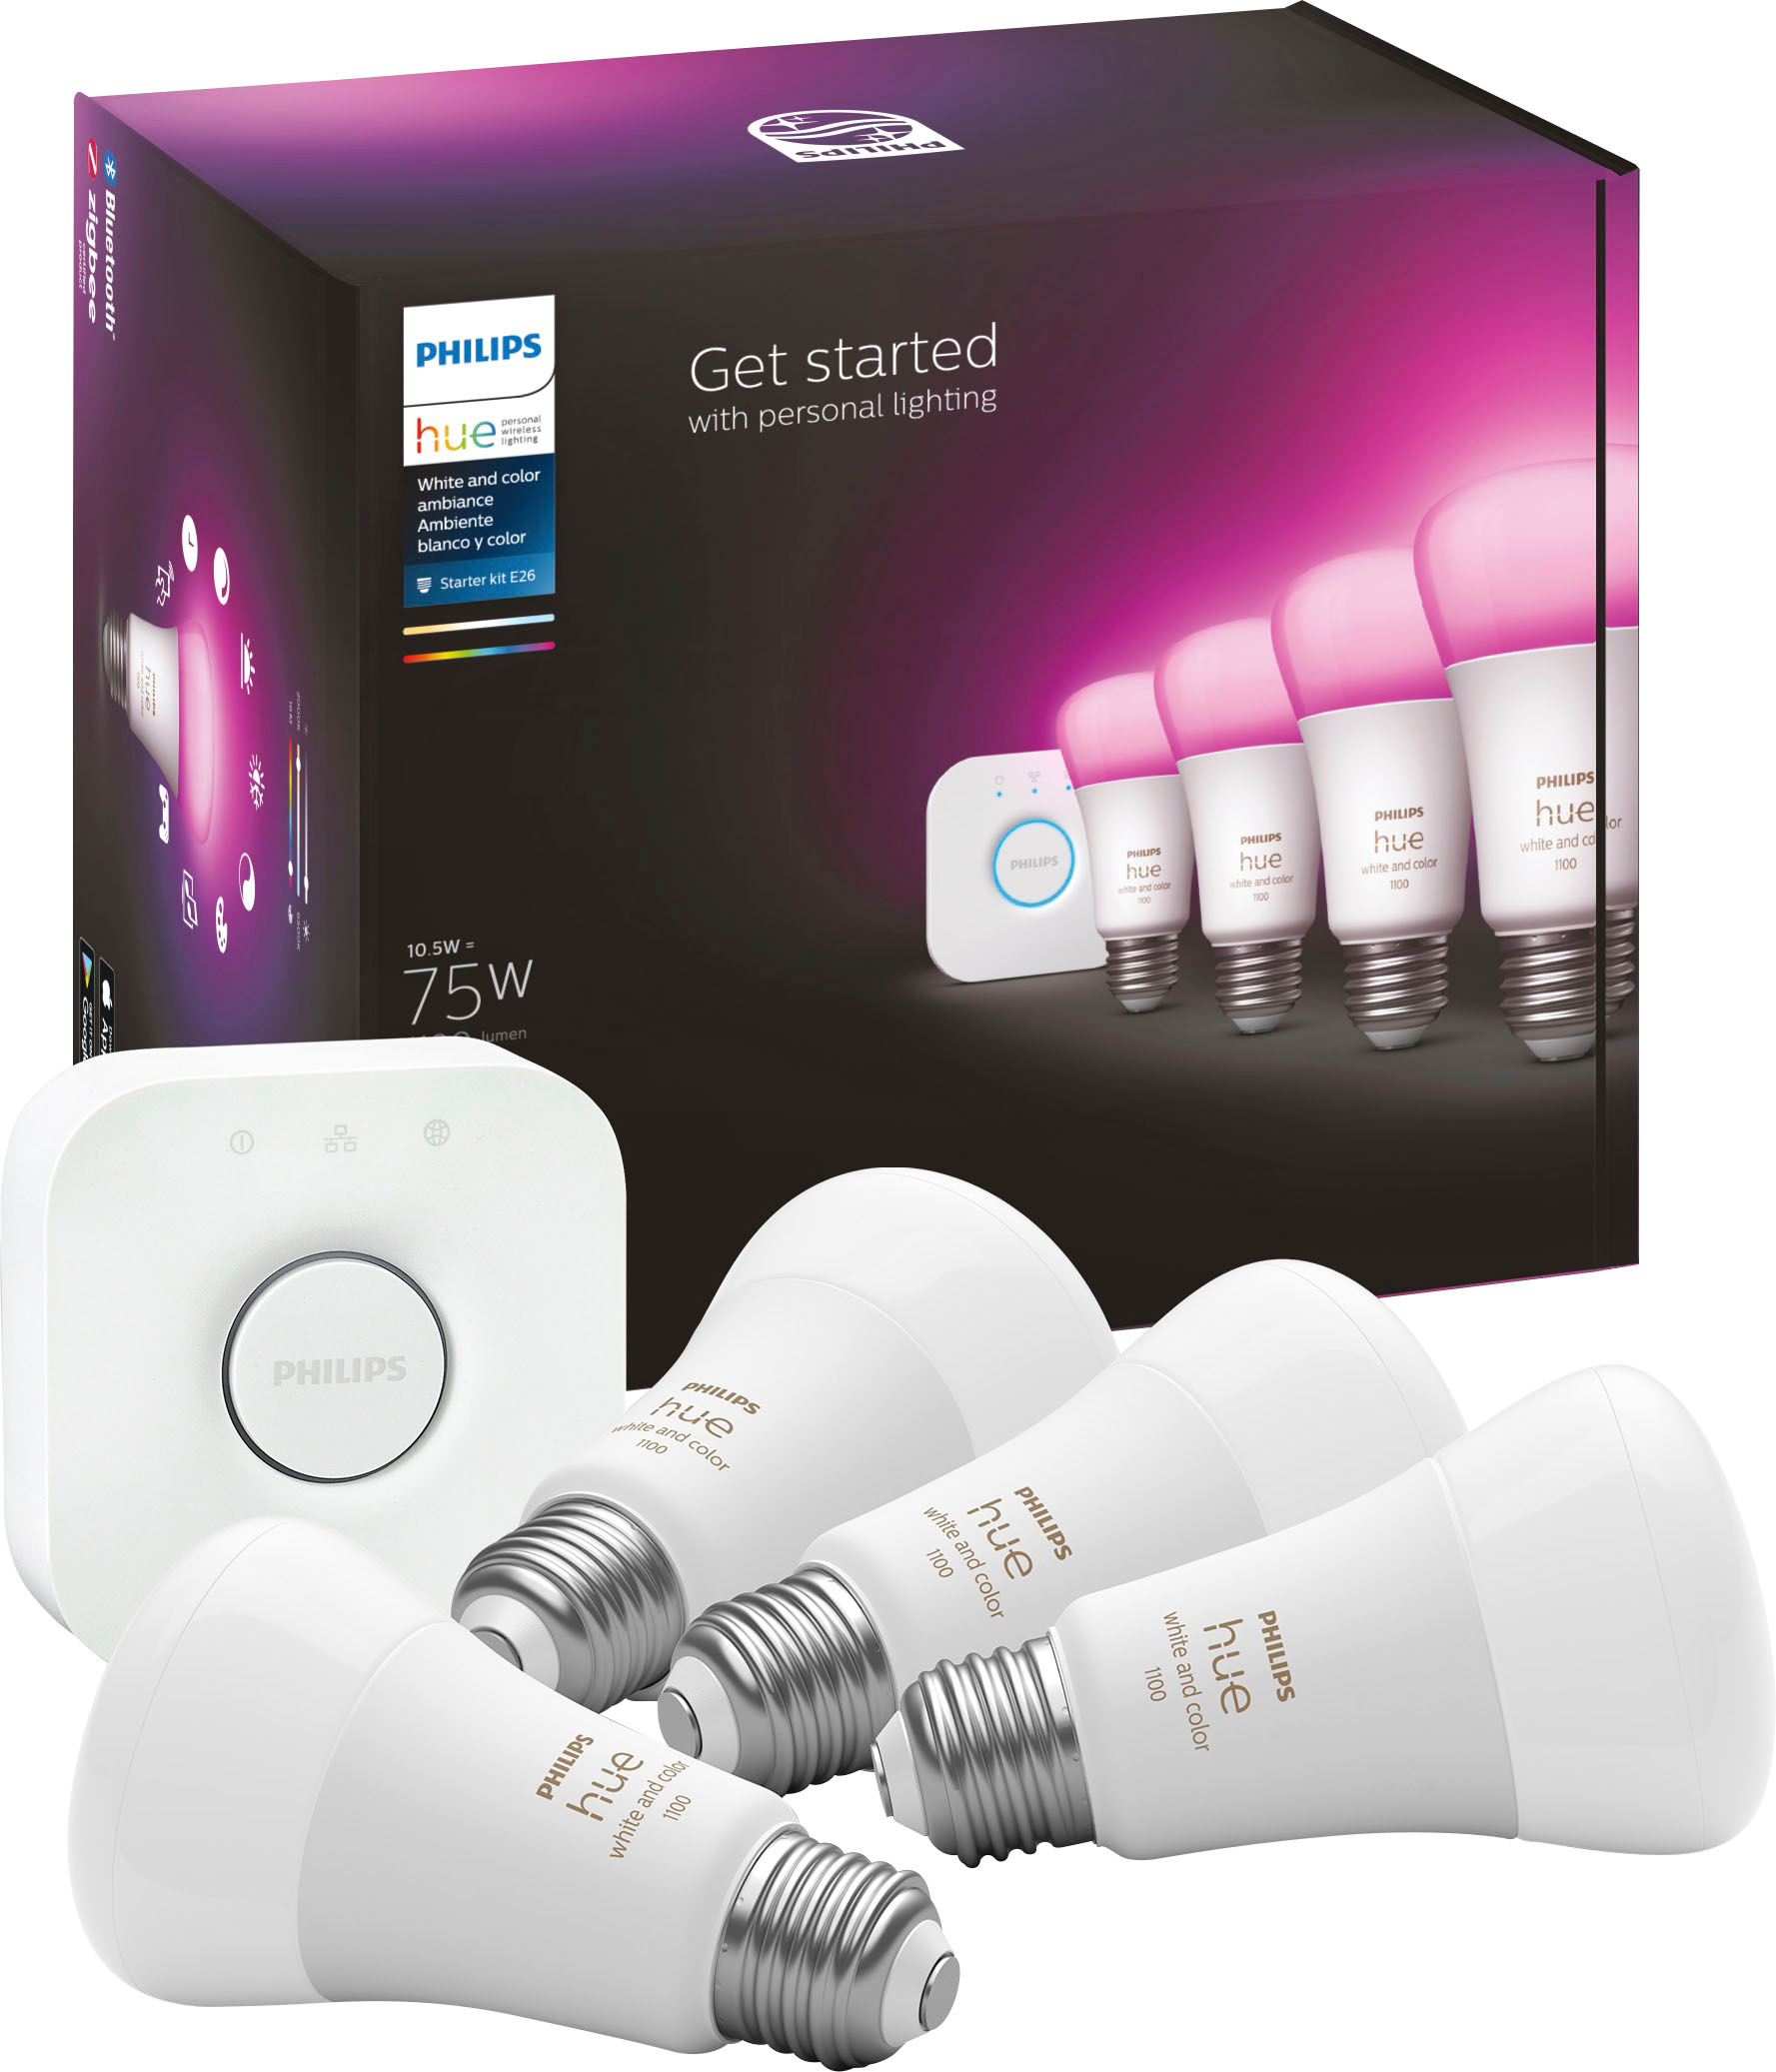 Philips 75W A19 Smart LED Starter Kit White and Color Ambiance 563296 Buy